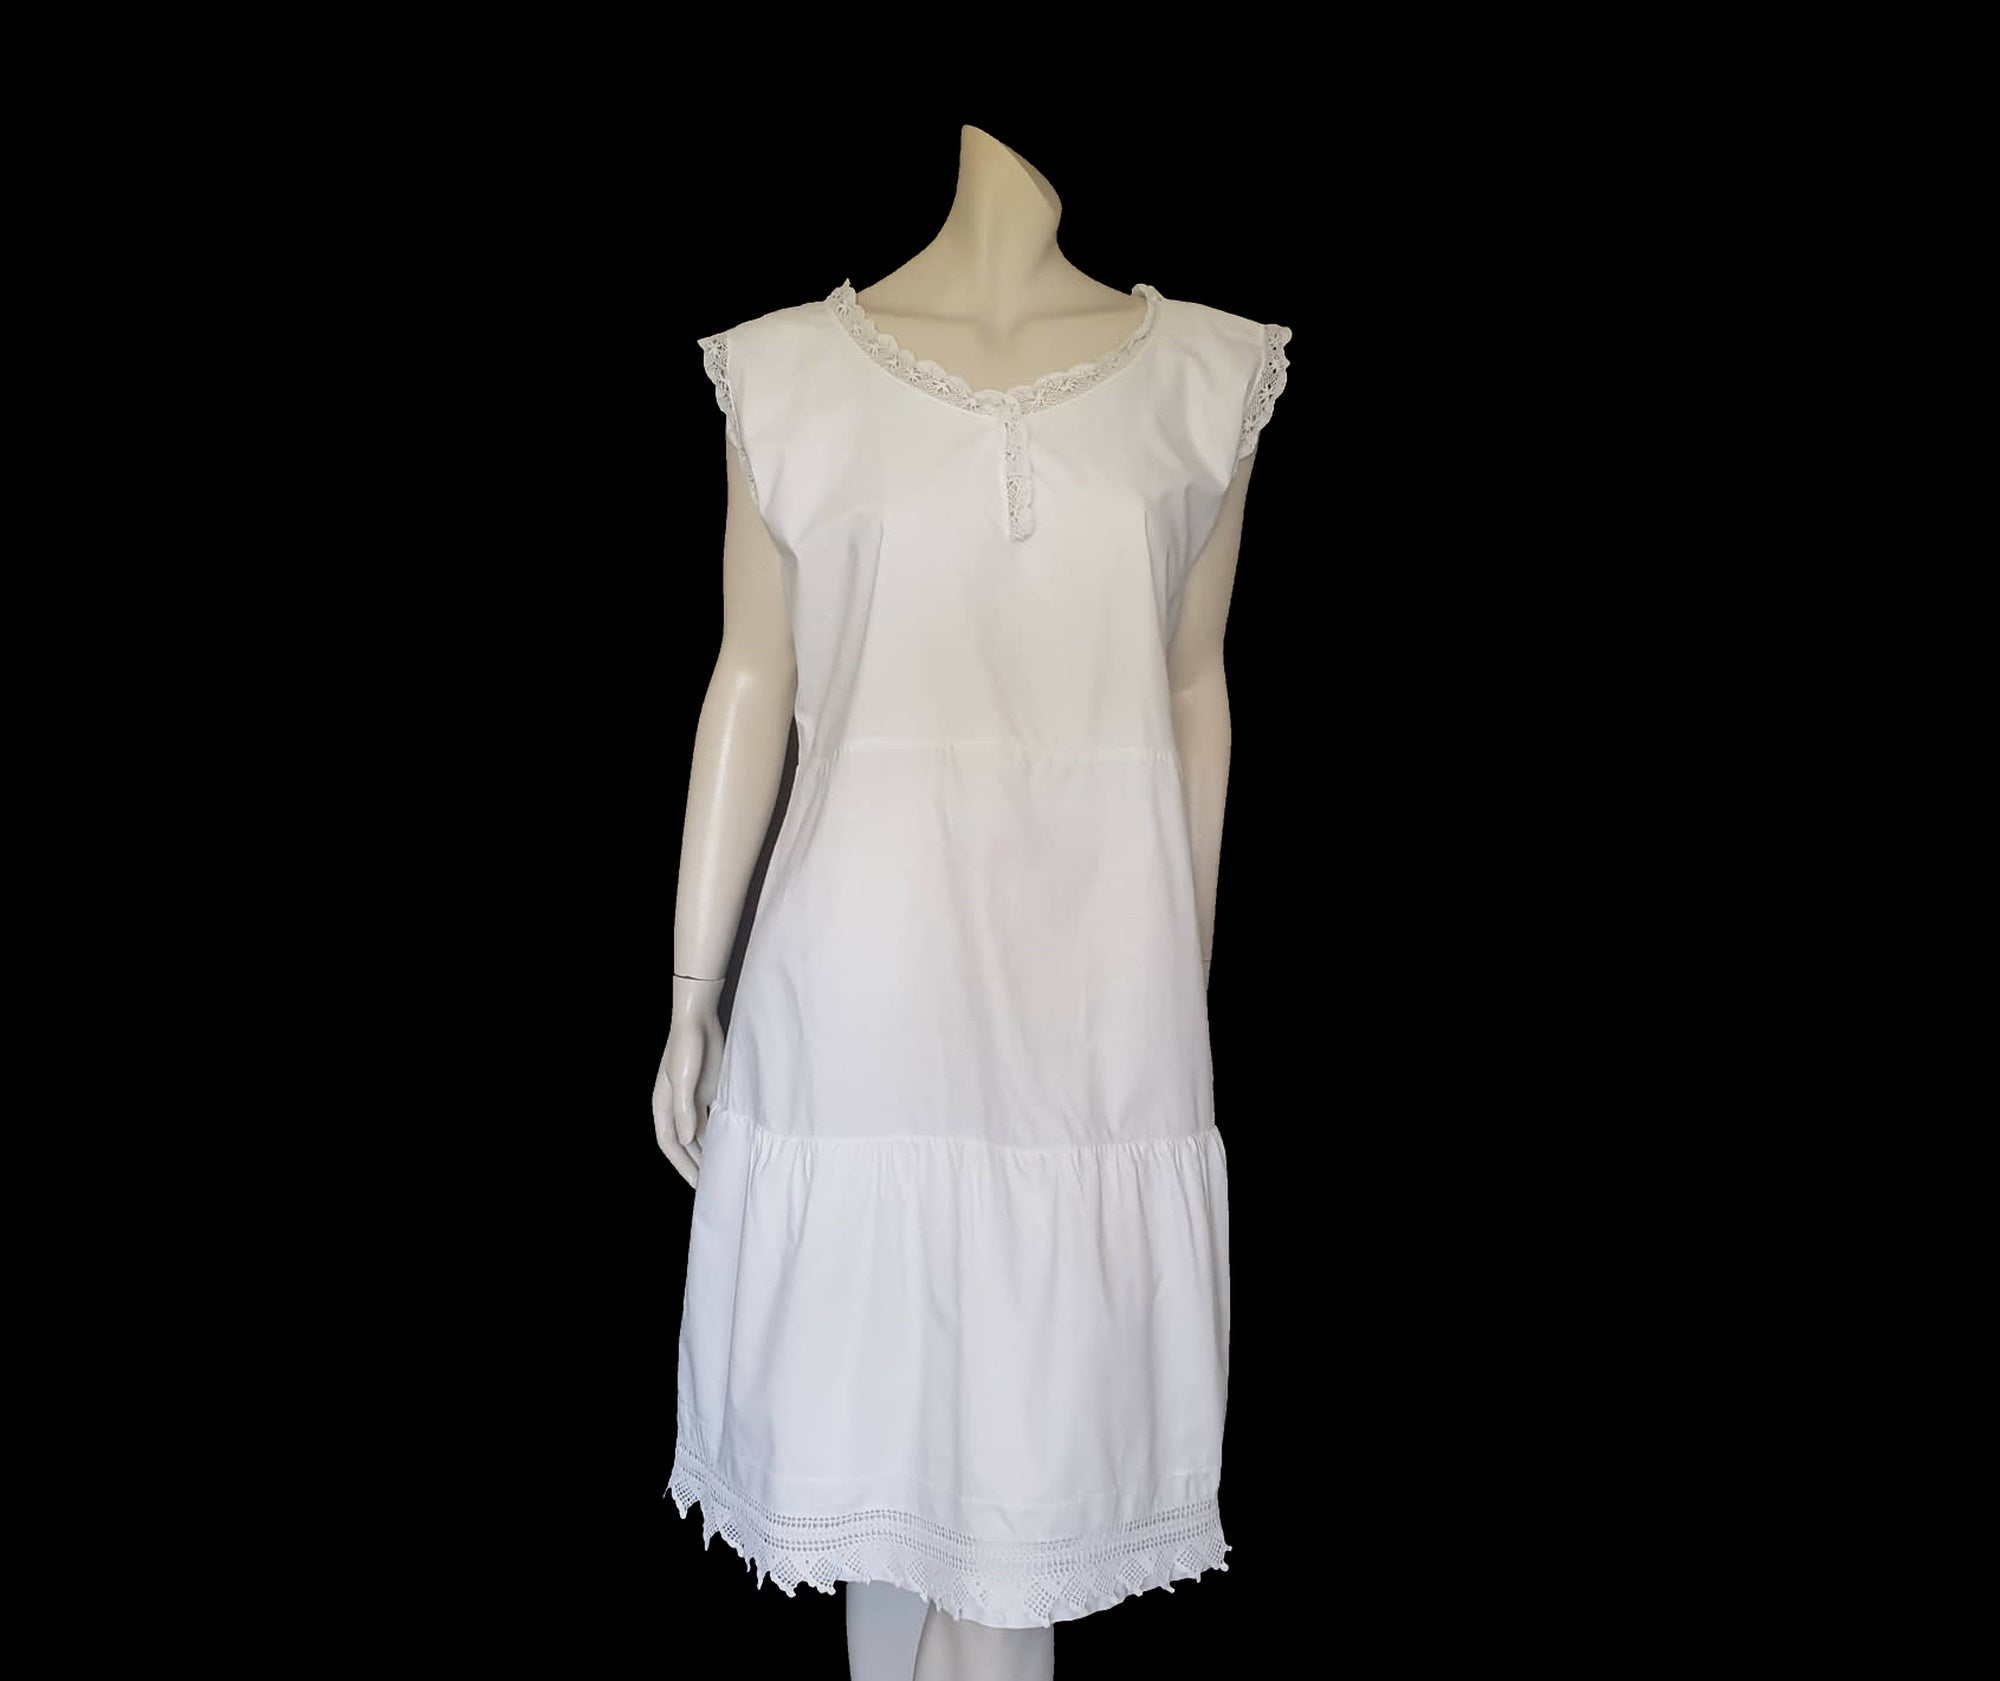 1920s White Cotton Petticoat Dress With Crocheted Edging - L